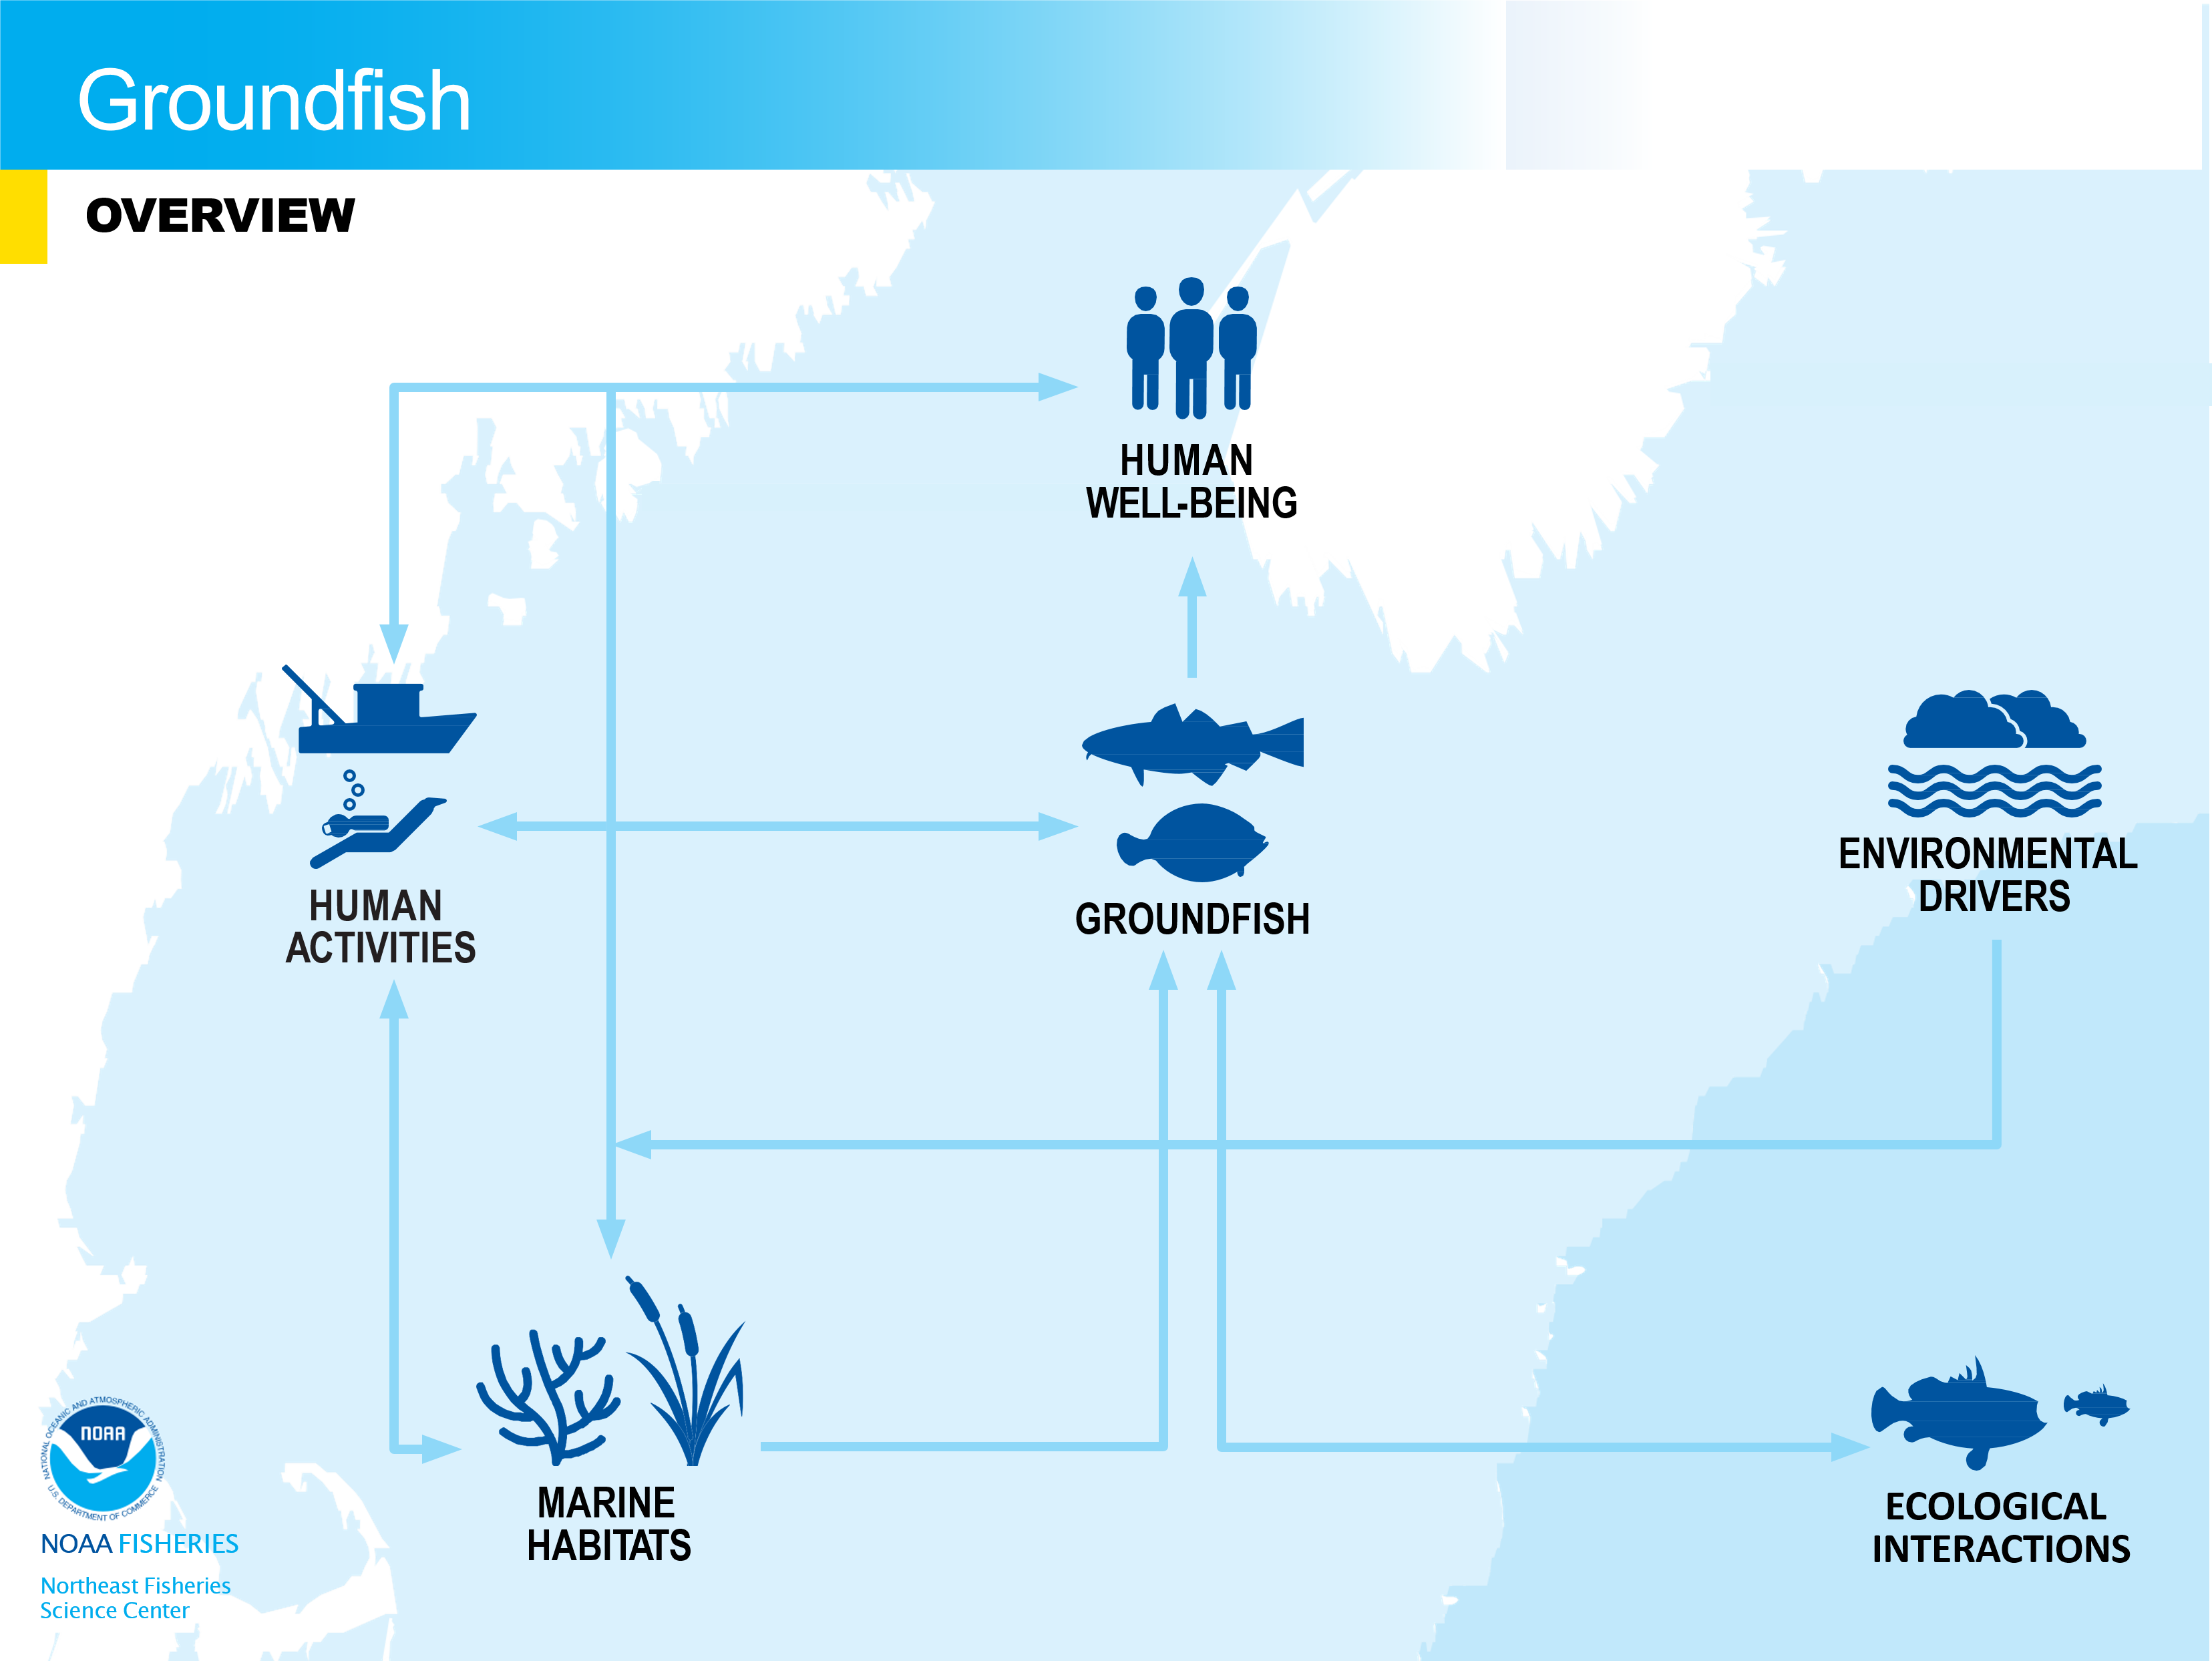 Conceptual model overview of groundfish in the NE-LME